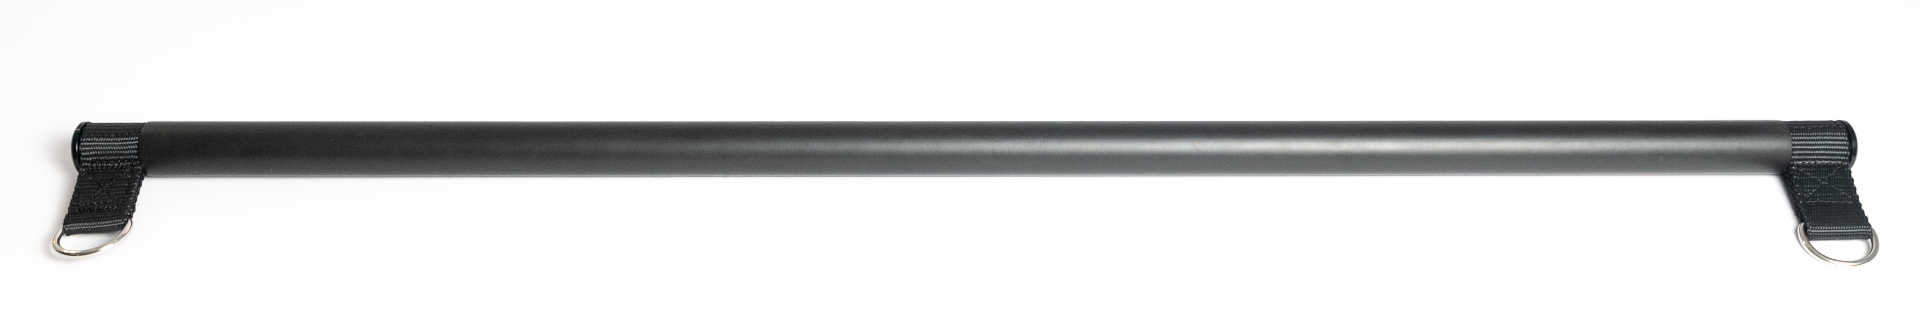 Exxentric Double Grip Bar (altes Modell) (SALE!)